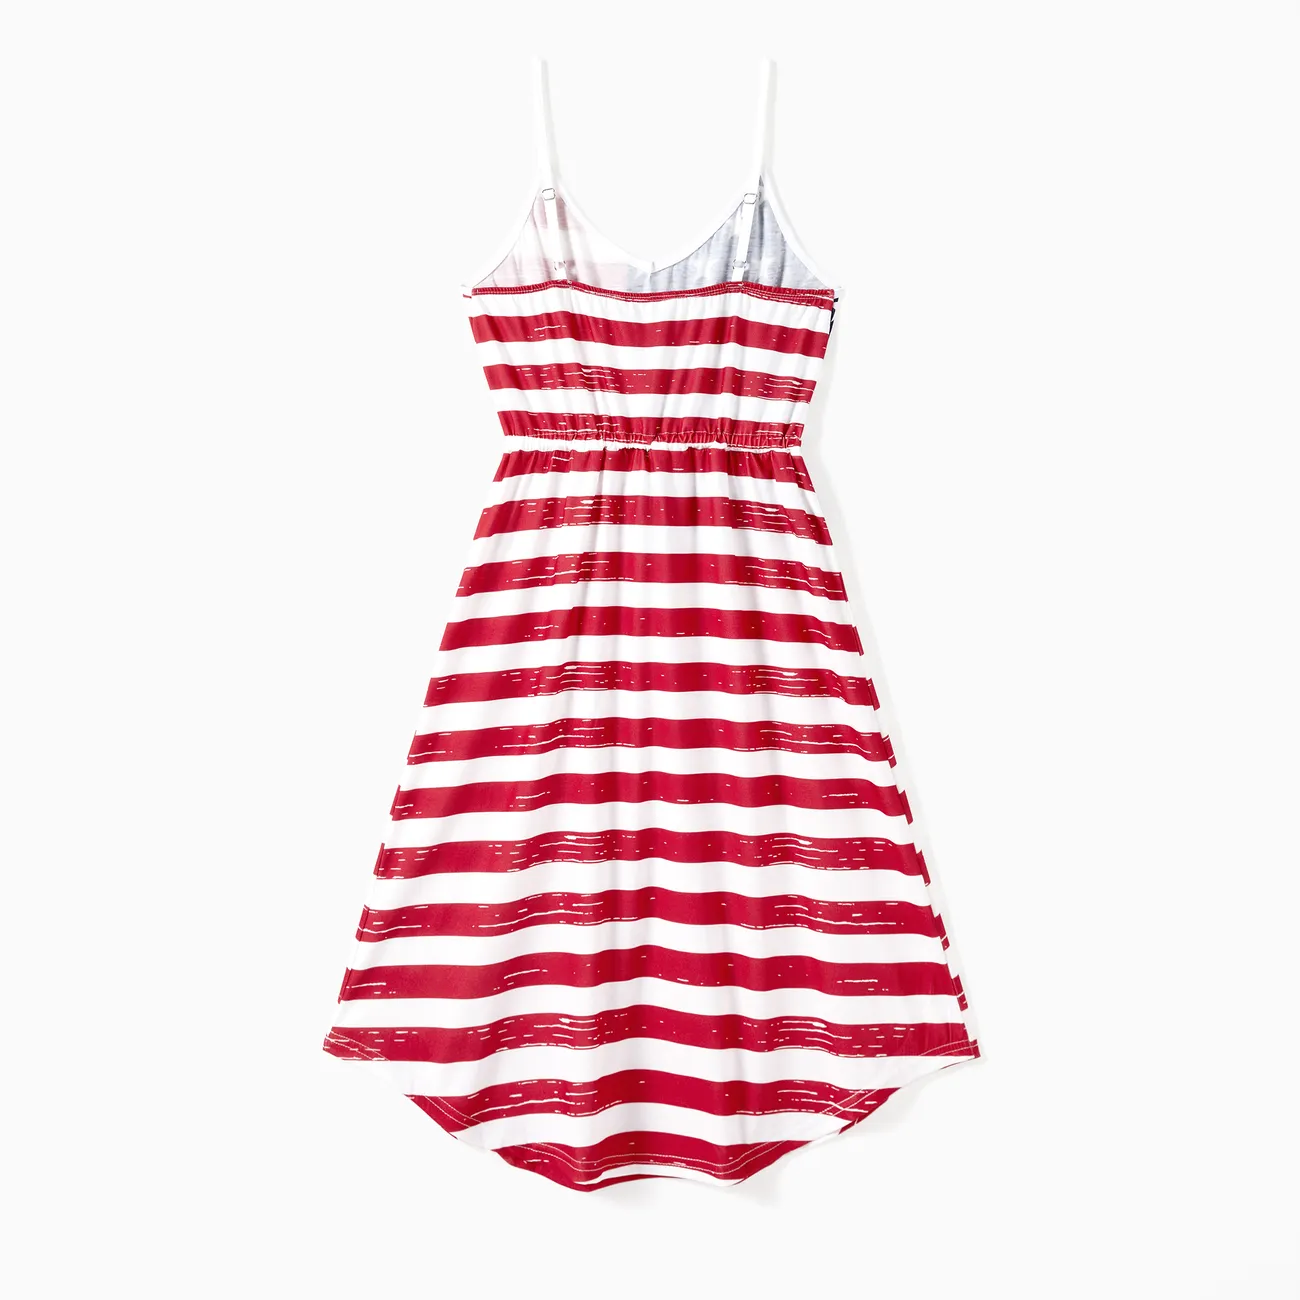 Independence Day Family Matching Sets Sunglasses Print Tee and American Flag Print Drawstring Waist Strap Dress with Pockets REDWHITE big image 1